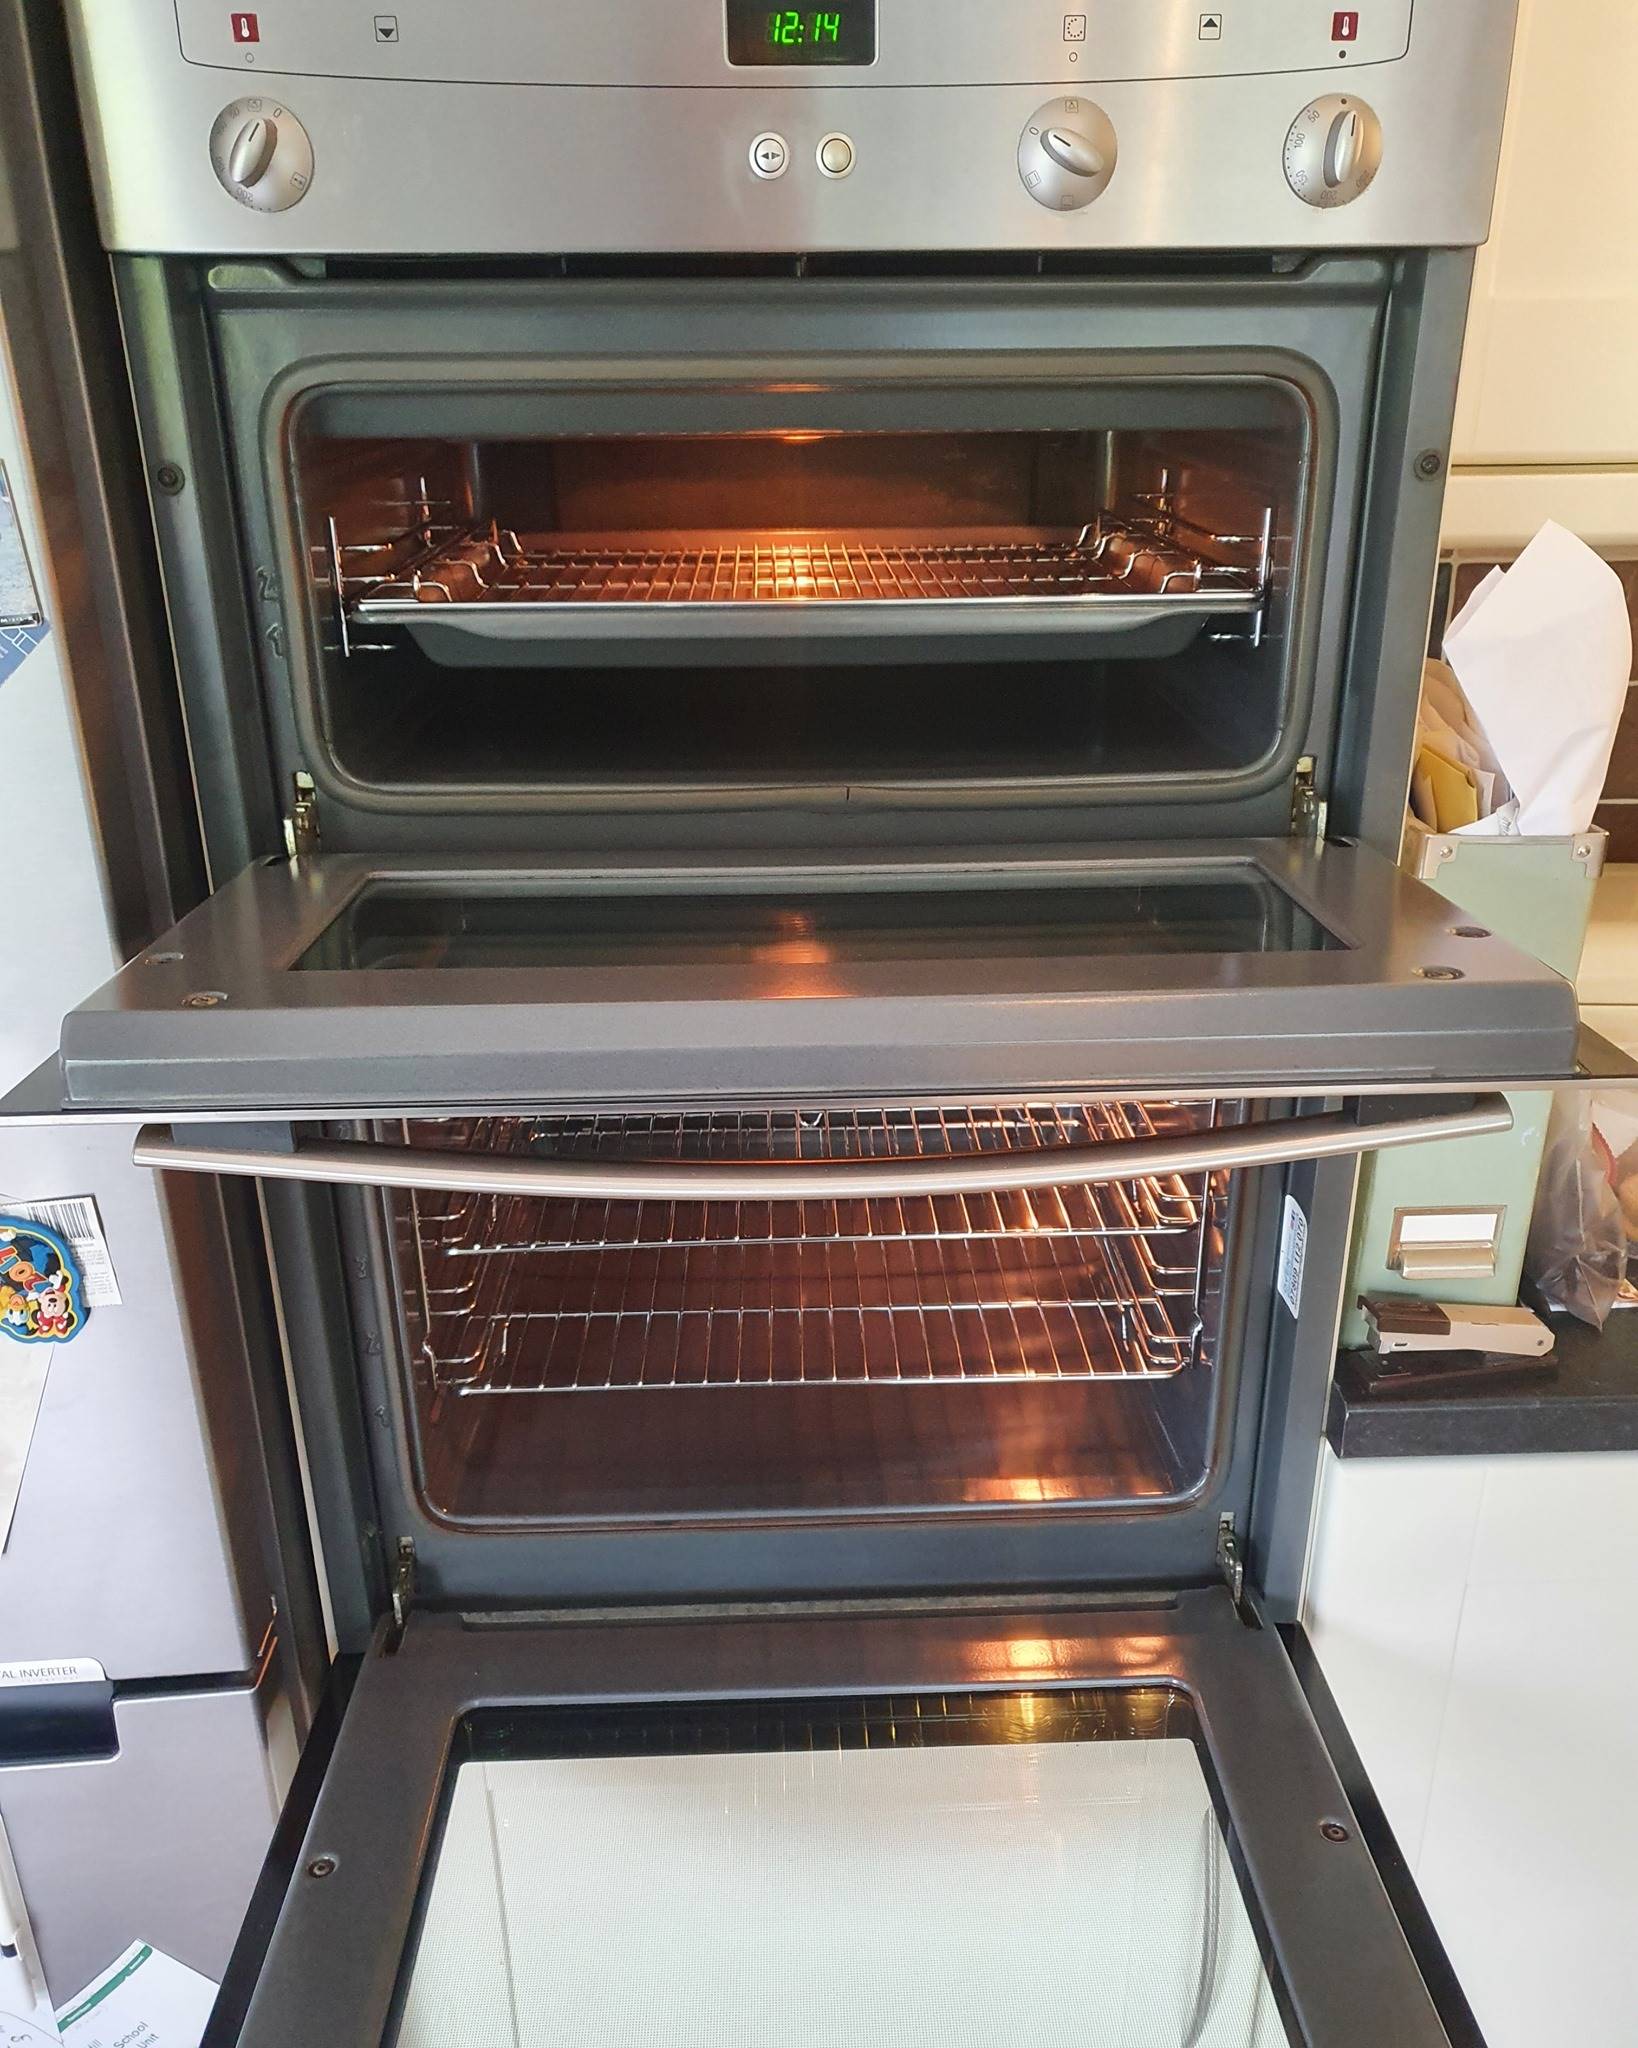 Grill clean | Clean Oven Belfast | Oven Cleaning NI | Oven Clean ni | Kitchen Cleaning NI | Oven Cleaning Belfast | Kitchen Appliance Cleaning Belfast | Oven Clean NI